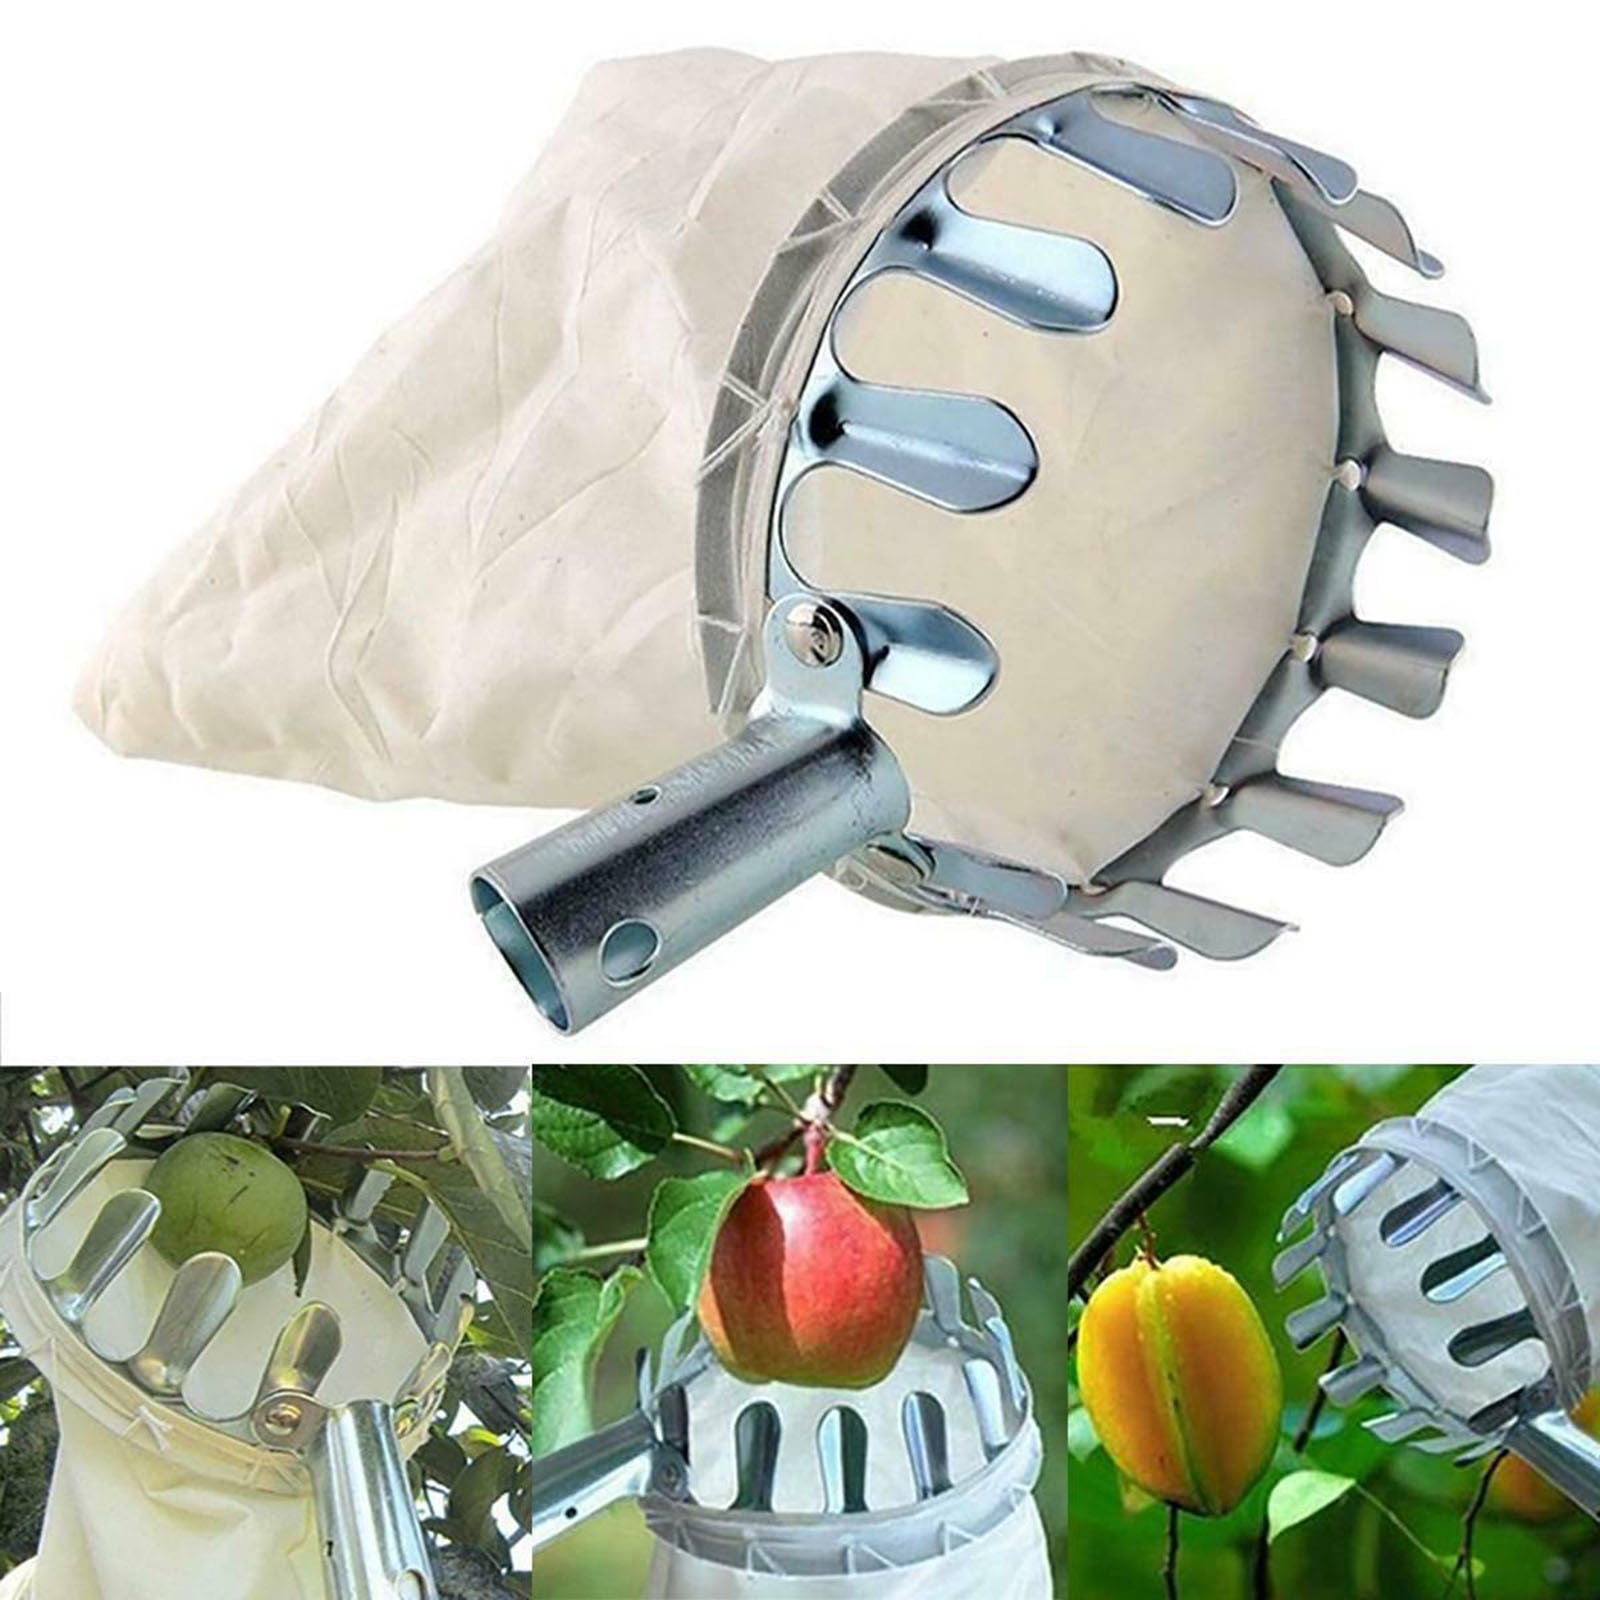 1PC Fruit Picker Practical Fruit Picker with Cloth Bag for Park Garden Orchard 